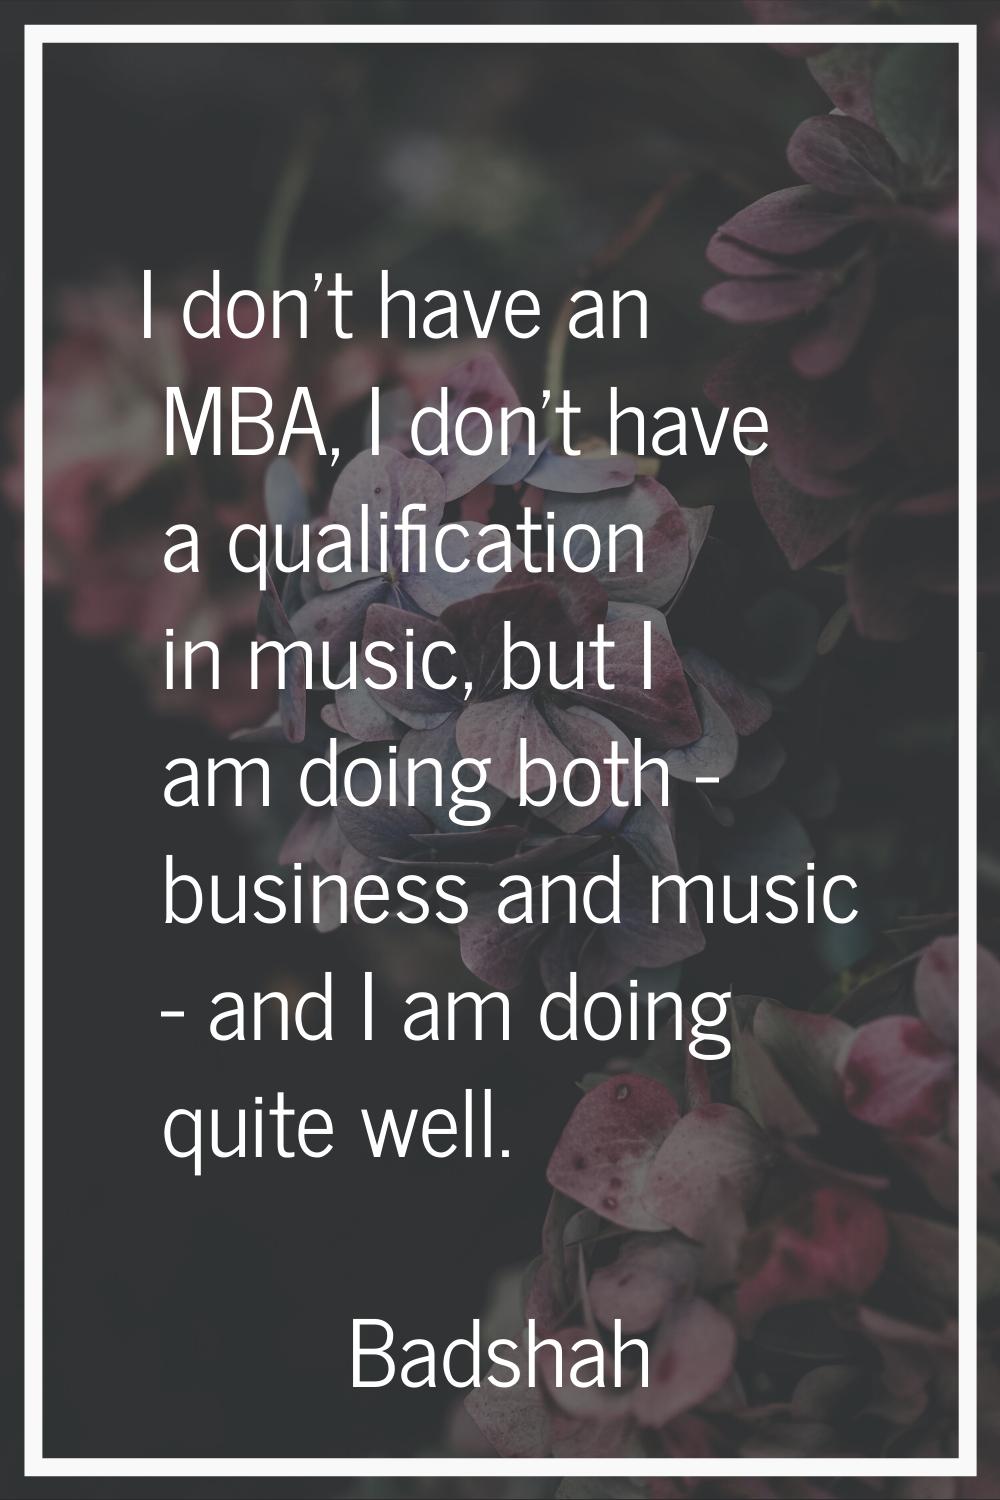 I don't have an MBA, I don't have a qualification in music, but I am doing both - business and musi